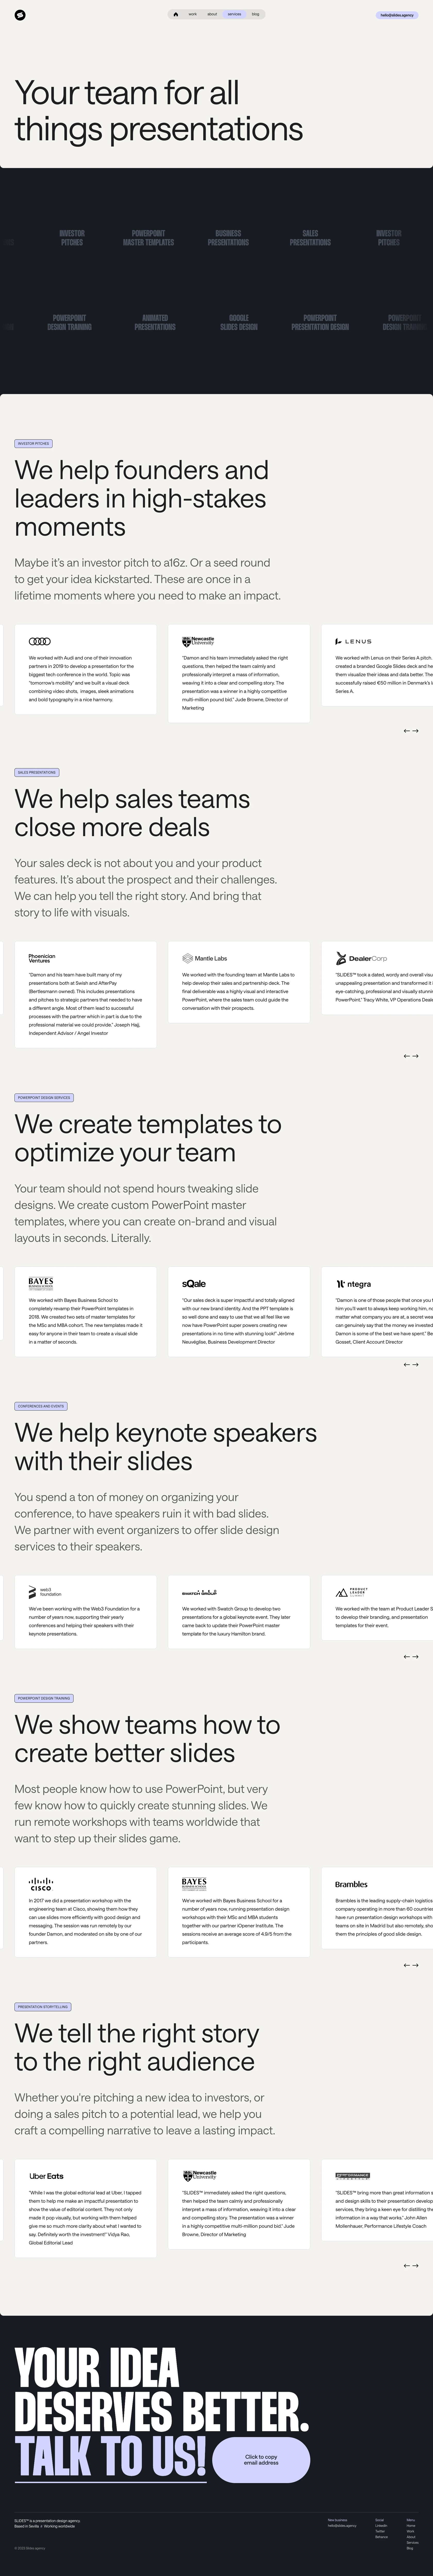 SLIDES Landing Page Example: As a presentation design agency, we use storytelling and design to create impactful pitch decks, sales presentations, PowerPoint templates, and more.